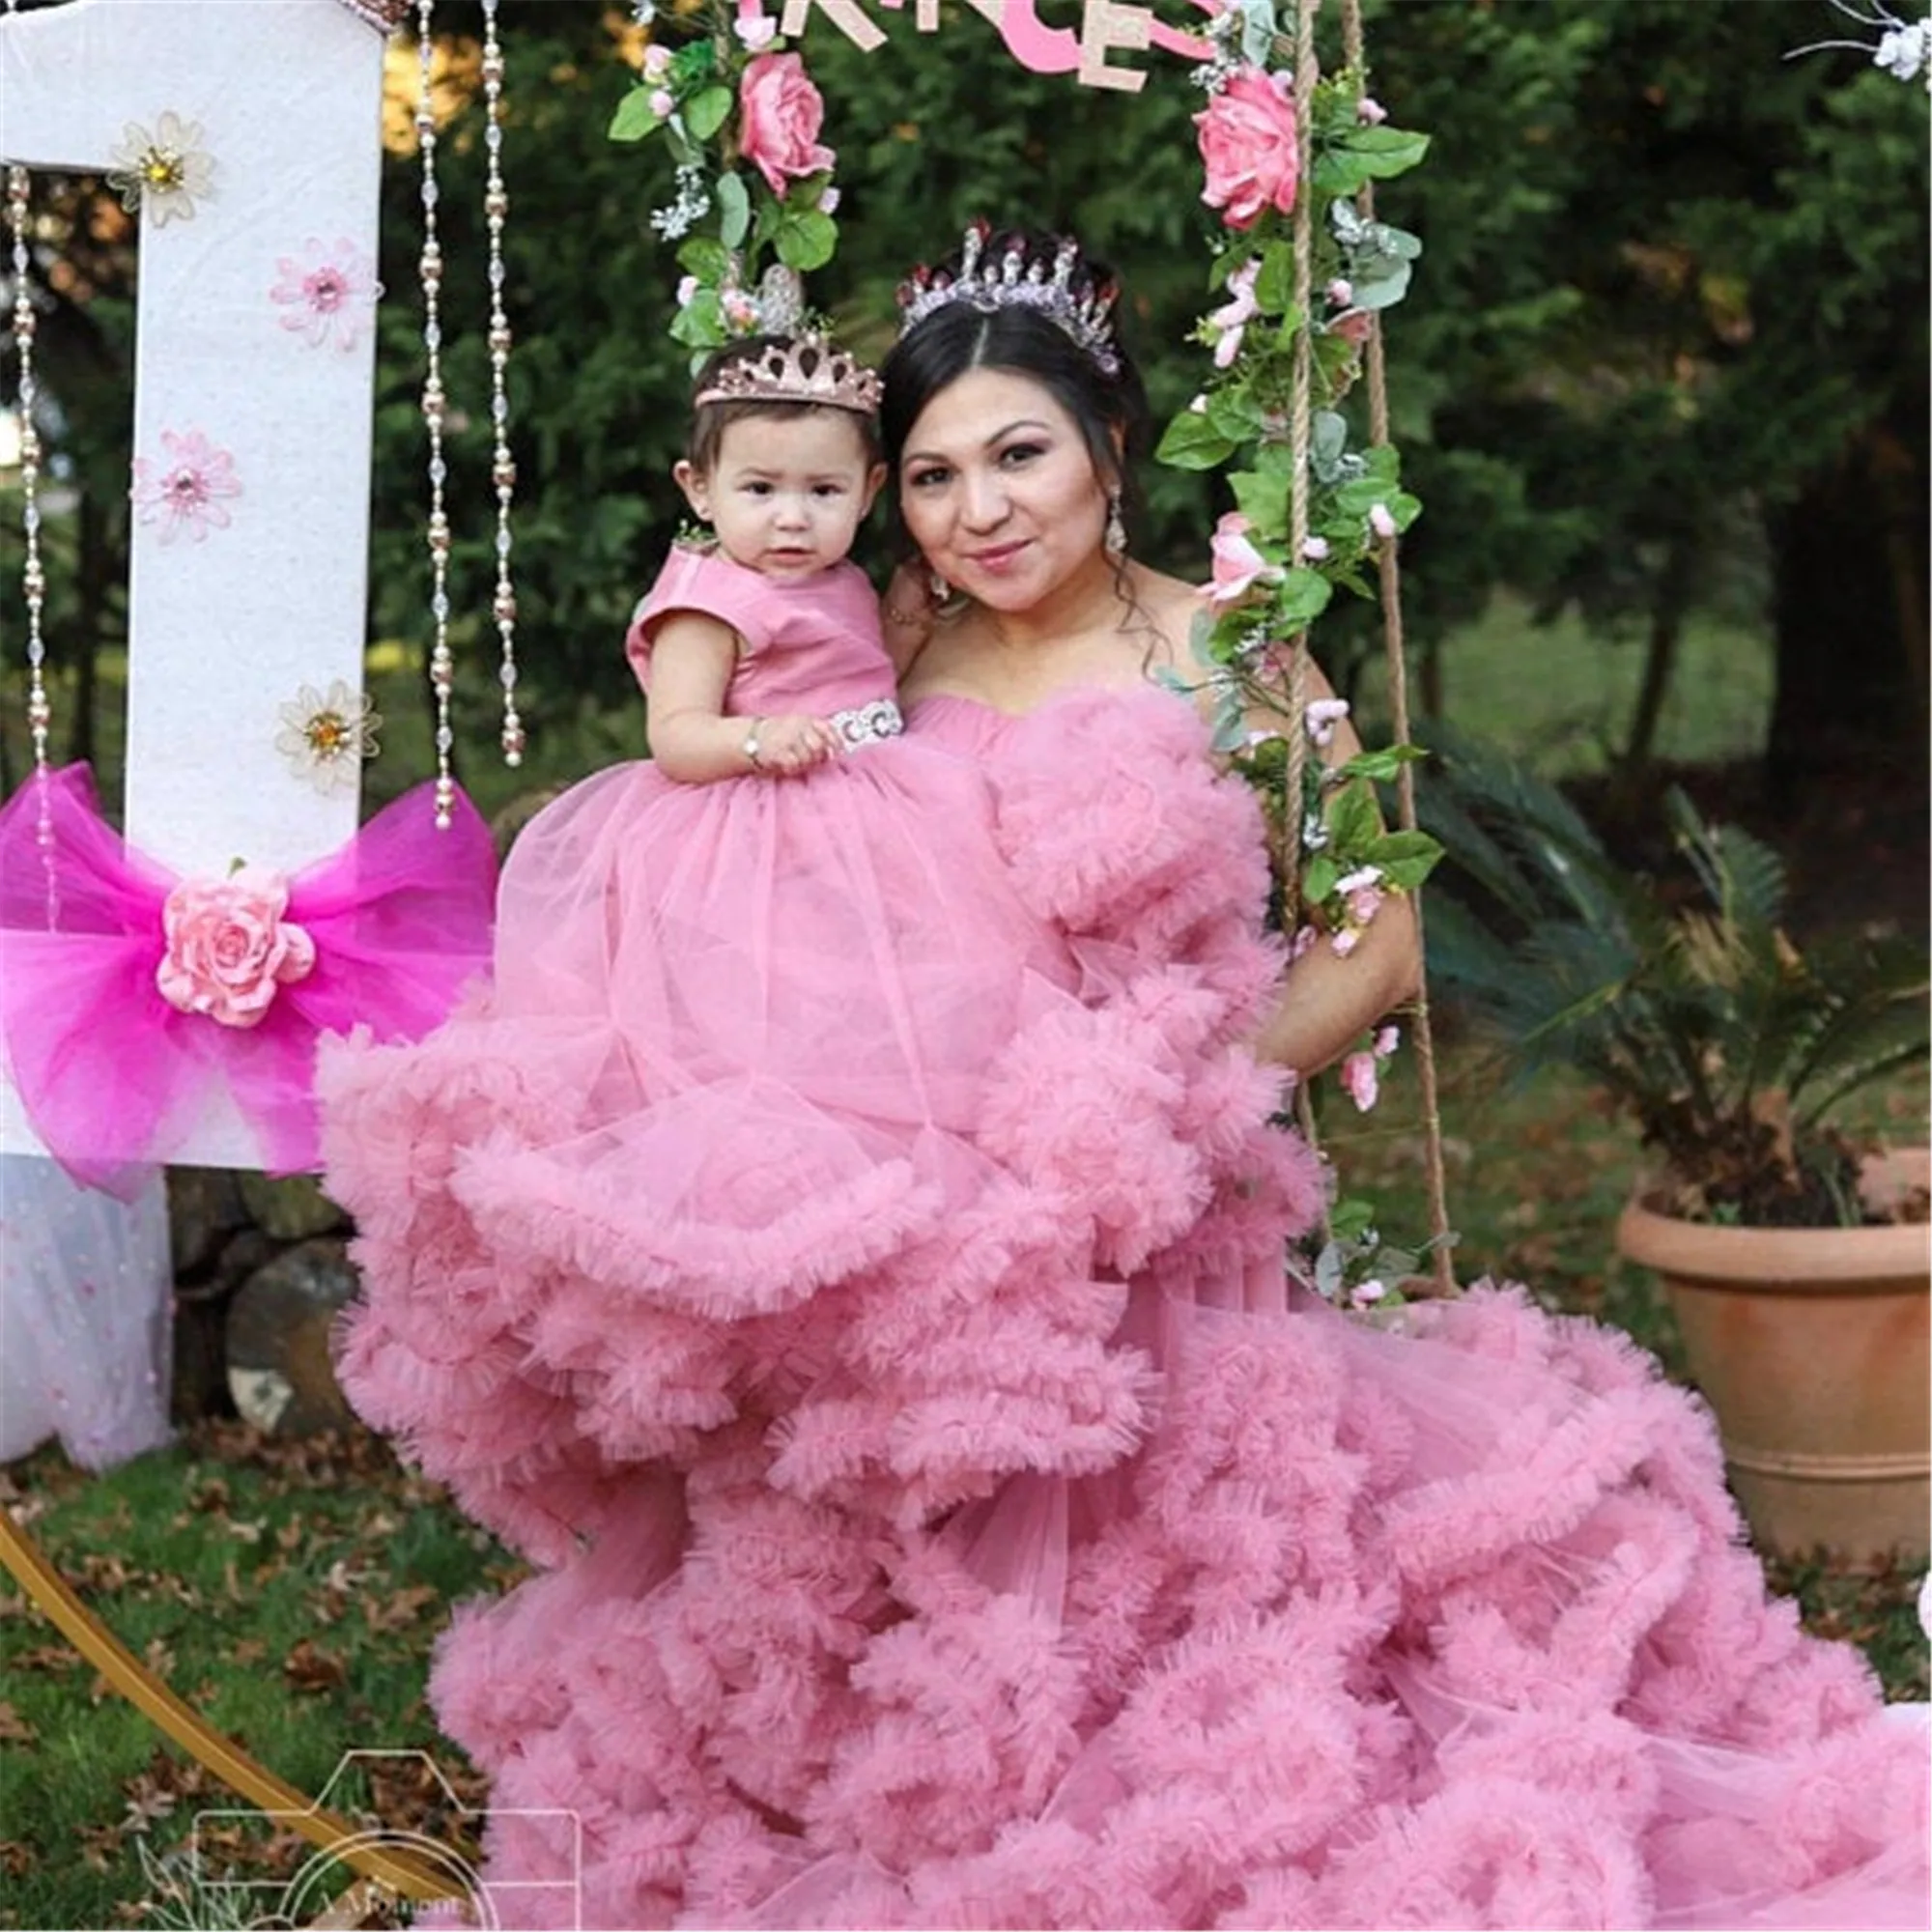 

Blush Pink Cloud Puffy Momther Daughter Birthday Party Dresses Ball Gowns Lovely Mom Kids Girls Celebration Pageant Gown Custom